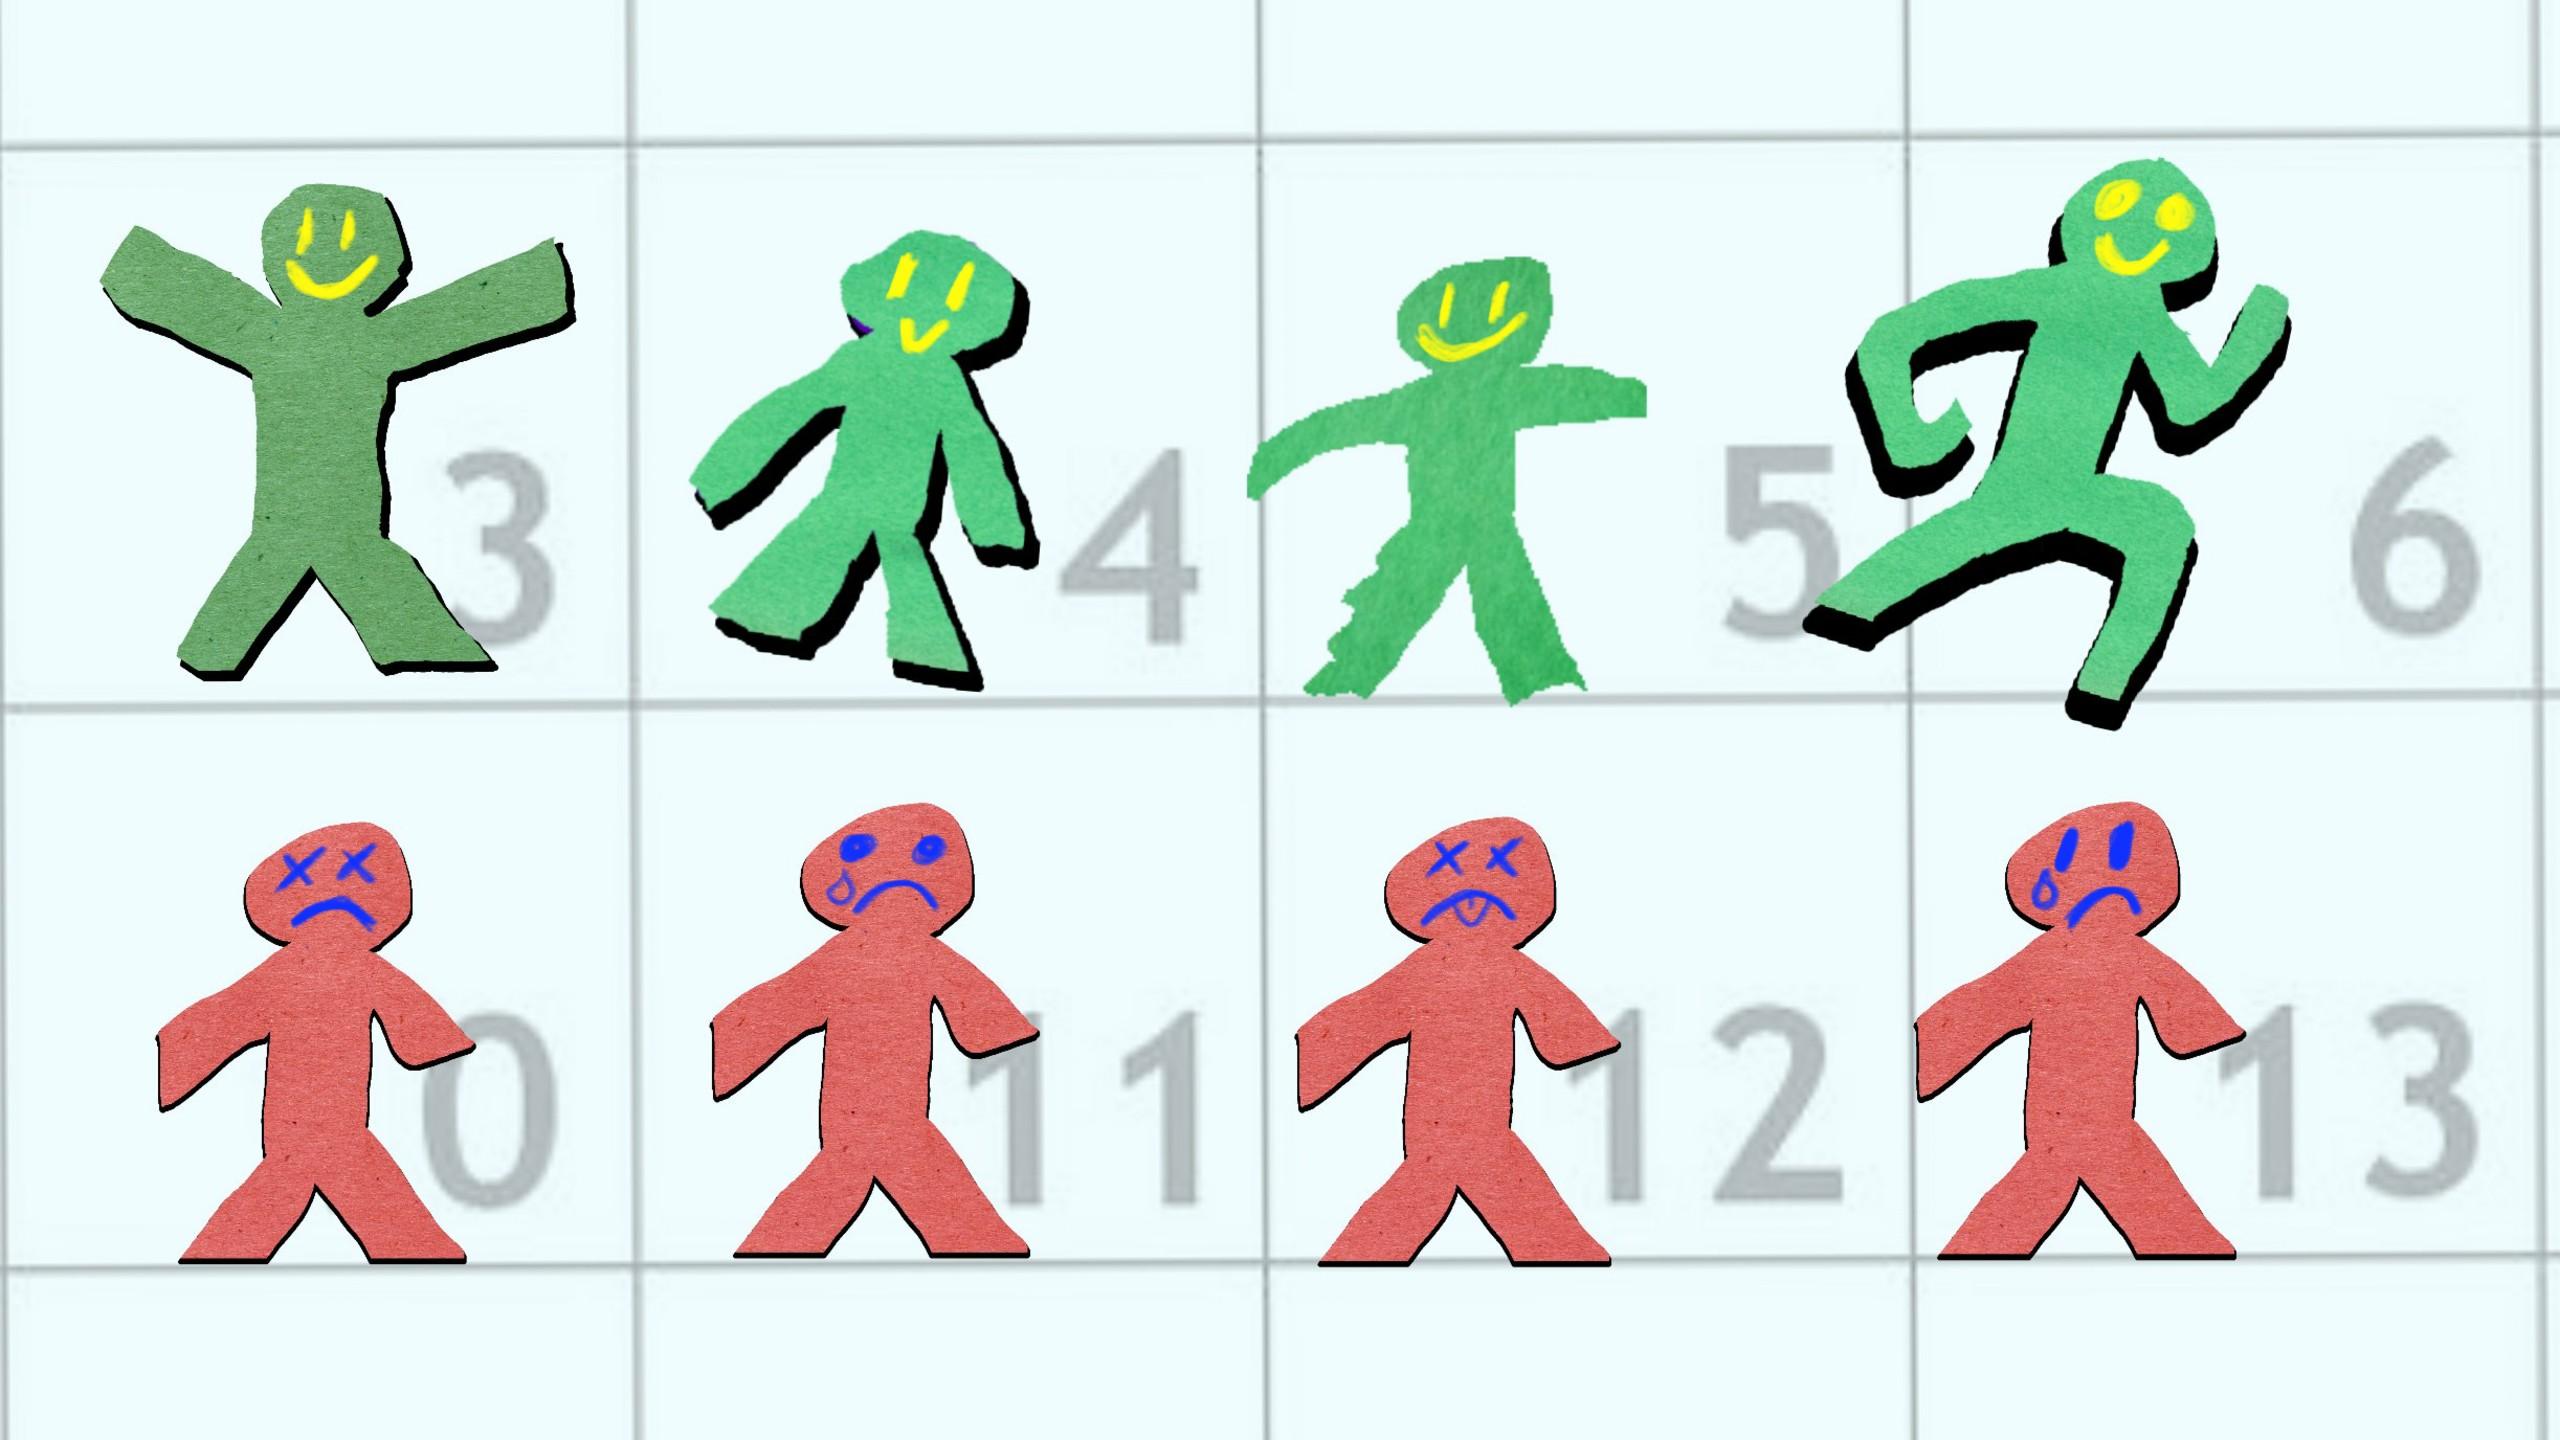 Two rows of stick people on top of a calendar. The top row of stick people are green and smiling; the bottom row are red and frowning.